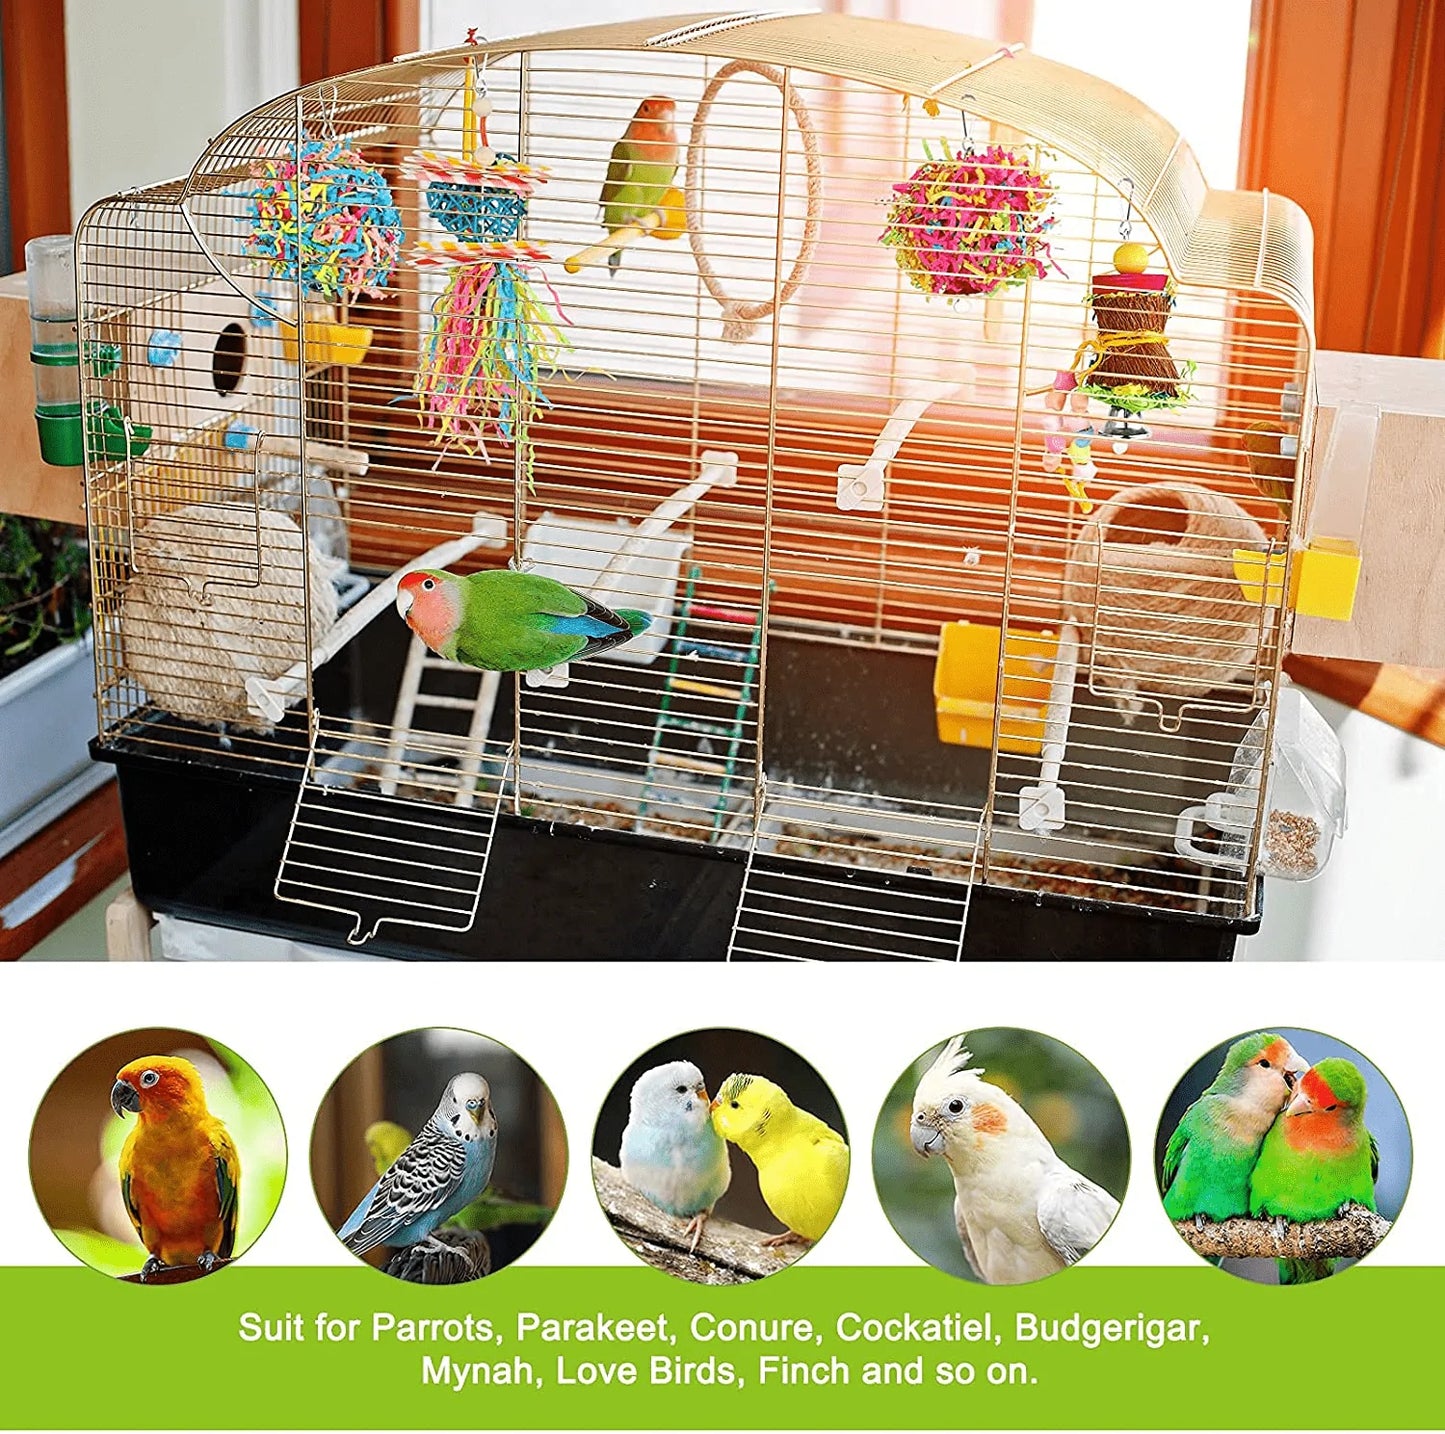 YUEPET 4 Pack Bird Shredder Toys Small Parrot Chewing Toys Parrot Cage Foraging Hanging Toy for Small Bird Parakeets Parrotlets Lovebirds Cockatiels